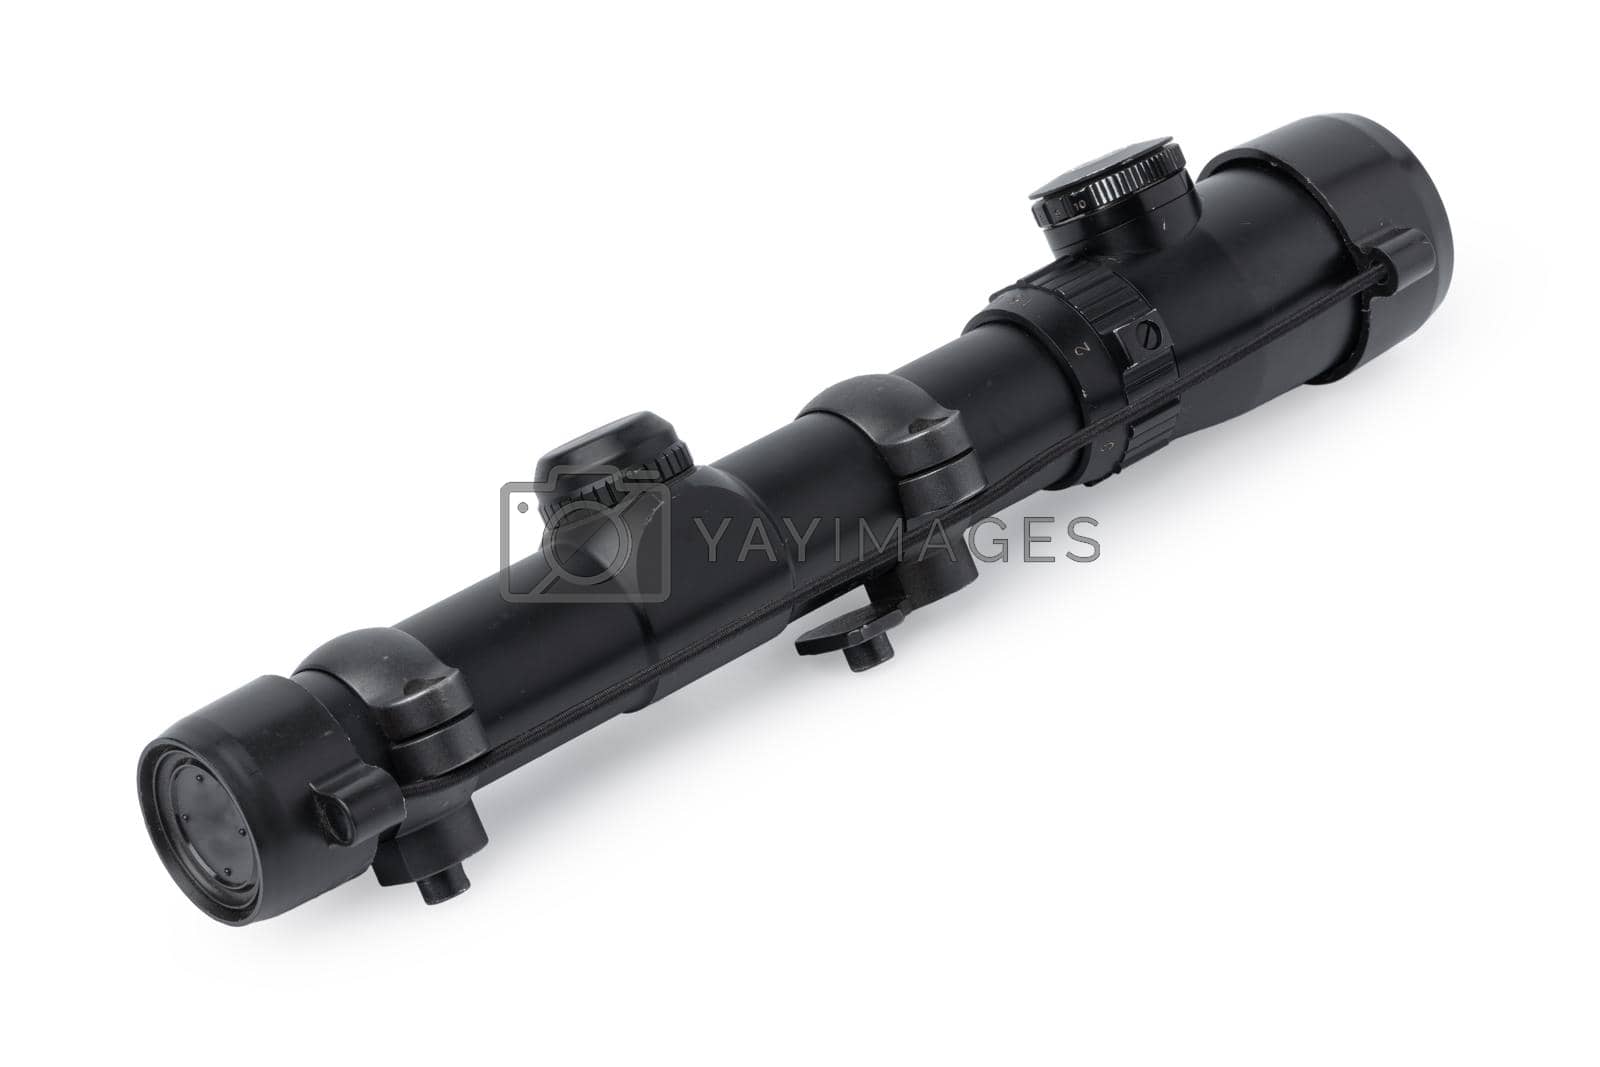 Royalty free image of Black optical scope for weapon isolated on white by Fabrikasimf